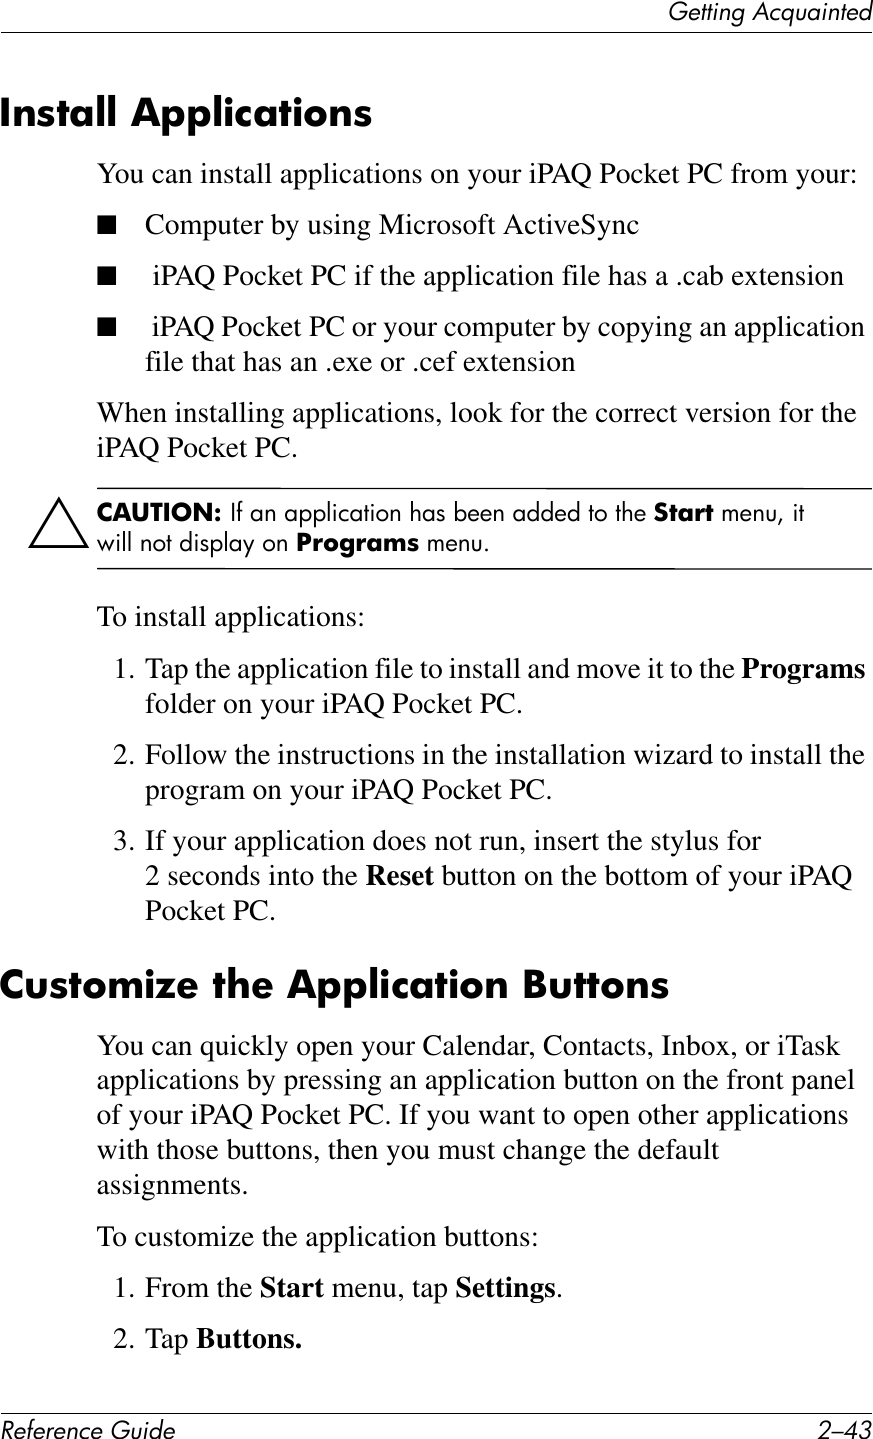 (&quot;11*%2&apos;&lt;&amp;T)4*%1&quot;+!&quot;#&quot;$&quot;%&amp;&quot;&apos;()*+&quot; 0/C9/$87;@@&amp;,FF@)%;7)6$8You can install applications on your iPAQ Pocket PC from your:■Computer by using Microsoft ActiveSync■ iPAQ Pocket PC if the application file has a .cab extension■ iPAQ Pocket PC or your computer by copying an application file that has an .exe or .cef extensionWhen installing applications, look for the correct version for the iPAQ Pocket PC.Ä2,34/5.1&amp;\B#76#7&quot;&quot;D$)7,$(6#!71#9++6#7CC+C#,(#,!+#:7;!7#5+64Y#$,#E$DD#6(,#C$1&quot;D7F#(6#S!6&apos;!;I8#5+64GTo install applications:1. Tap the application file to install and move it to the Programs folder on your iPAQ Pocket PC.2. Follow the instructions in the installation wizard to install the program on your iPAQ Pocket PC.3. If your application does not run, insert the stylus for 2 seconds into the Reset button on the bottom of your iPAQ Pocket PC.2(876I)a&quot;&amp;7?&quot;&amp;,FF@)%;7)6$&amp;C(776$8You can quickly open your Calendar, Contacts, Inbox, or iTask applications by pressing an application button on the front panel of your iPAQ Pocket PC. If you want to open other applications with those buttons, then you must change the default assignments. To customize the application buttons:1. From the Start menu, tap Settings.2. Tap Buttons.